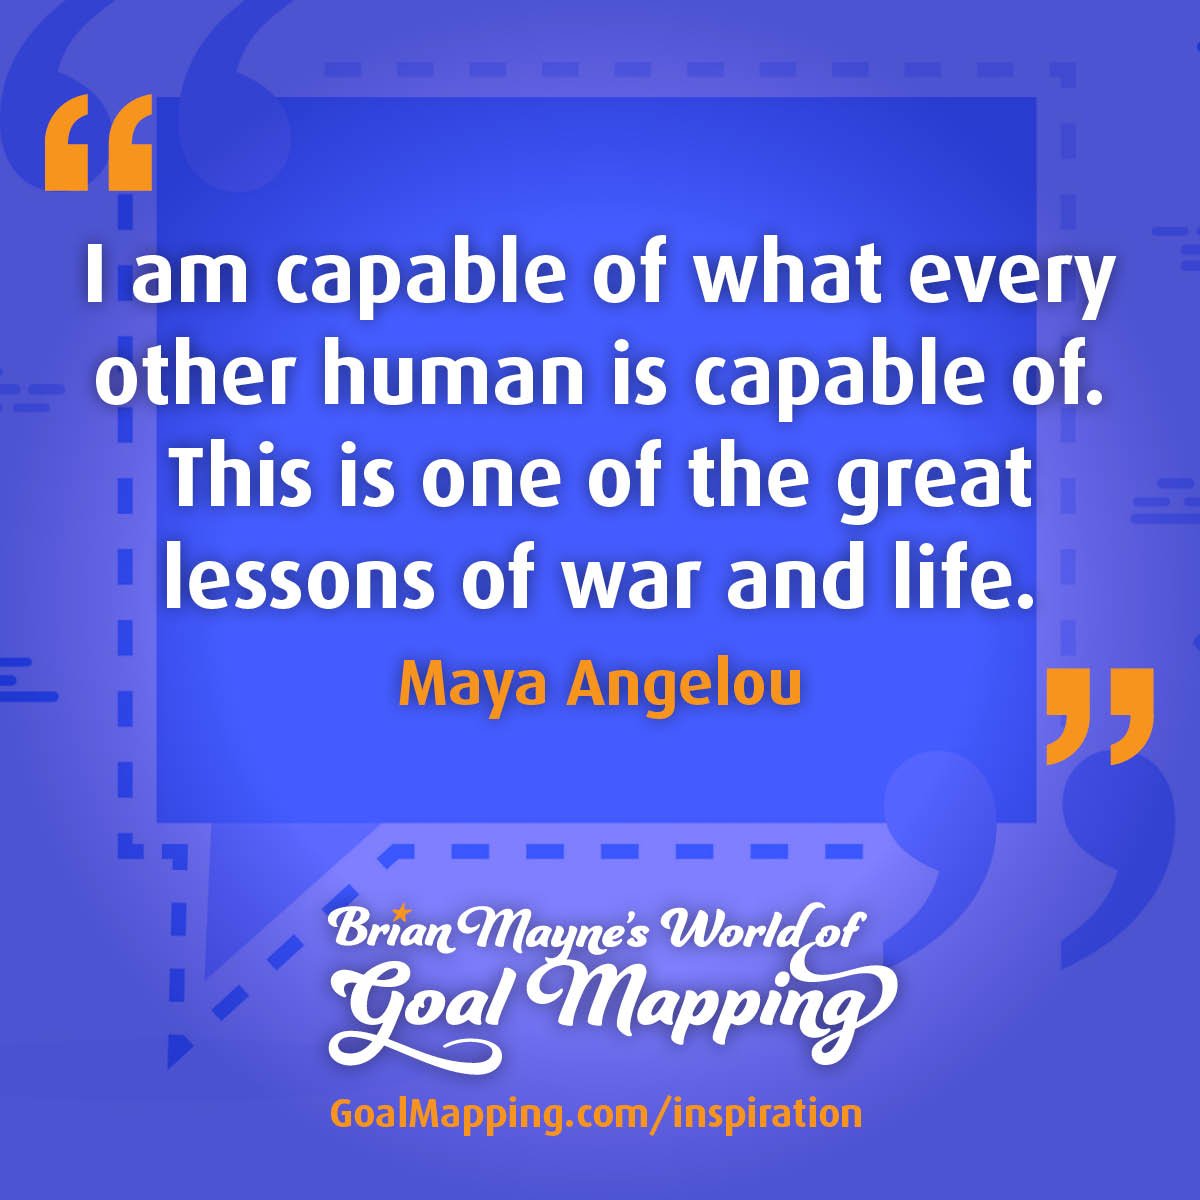 "I am capable of what every other human is capable of. This is one of the great lessons of war and life." Maya Angelou